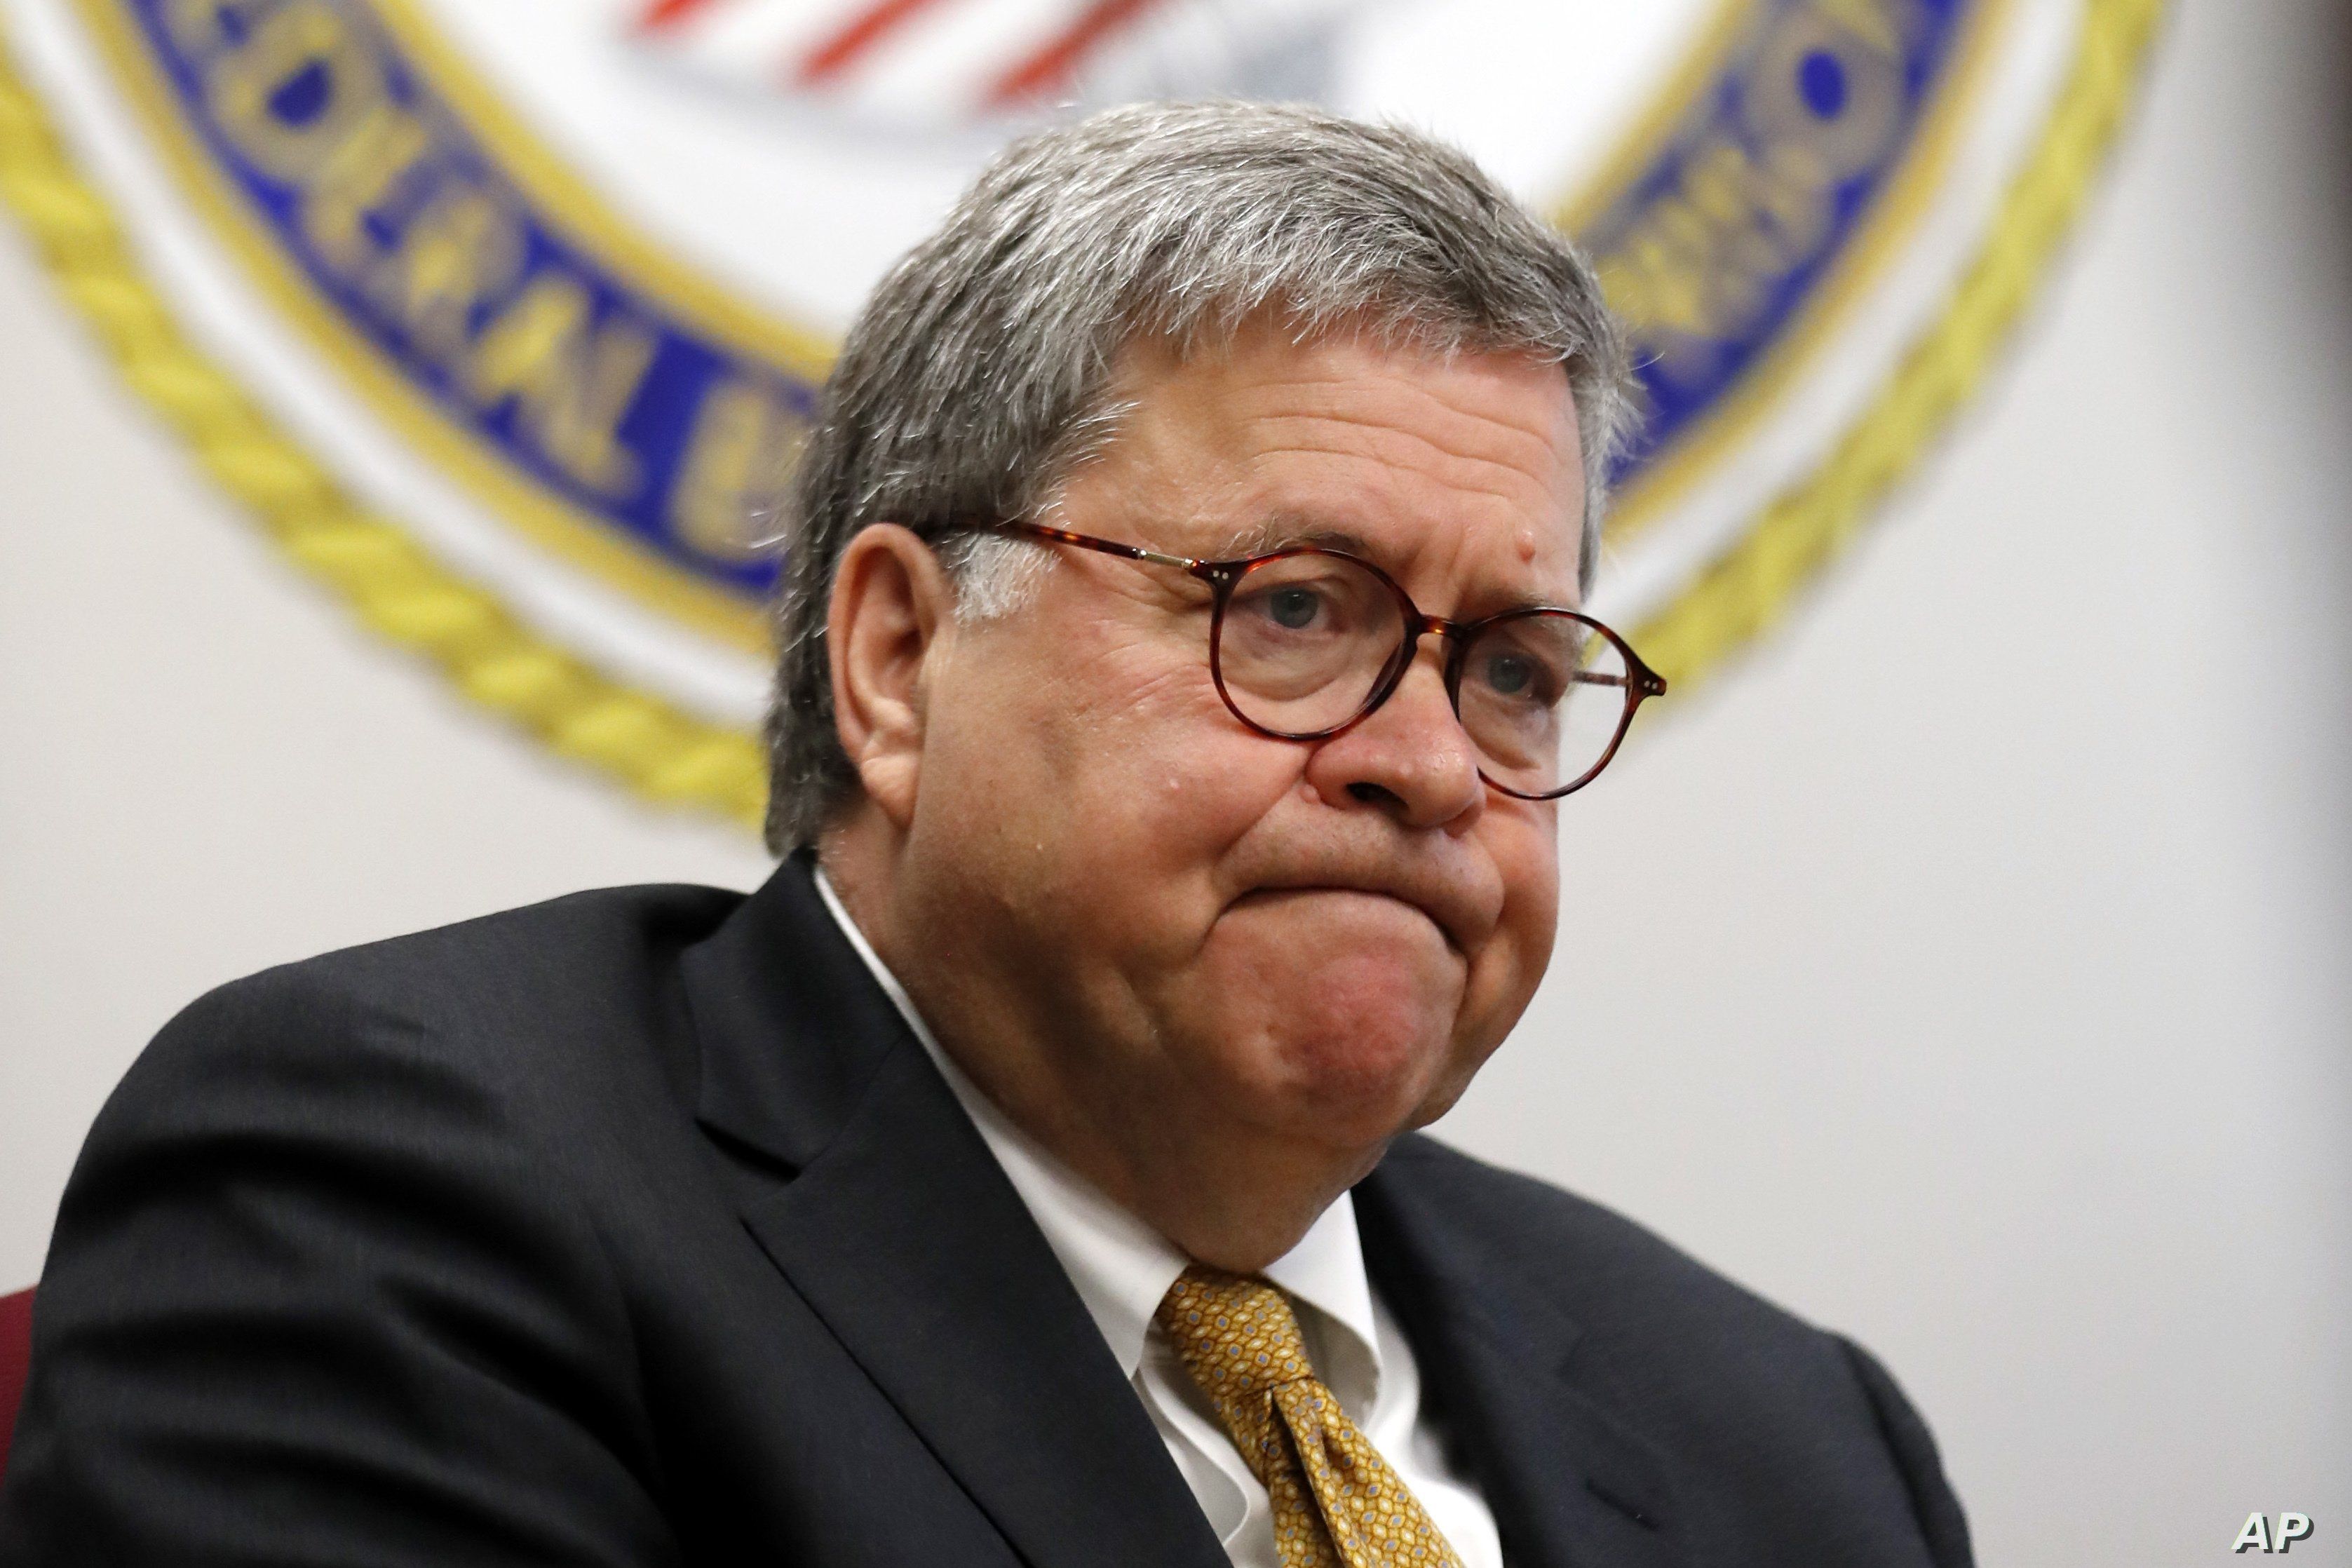 FILE - Attorney General William Barr speaks at a federal prison in Edgefield, S.C. The Justice Department says it will execute federal death row inmates for the first time since 2003. Five inmates will be executed starting in December.